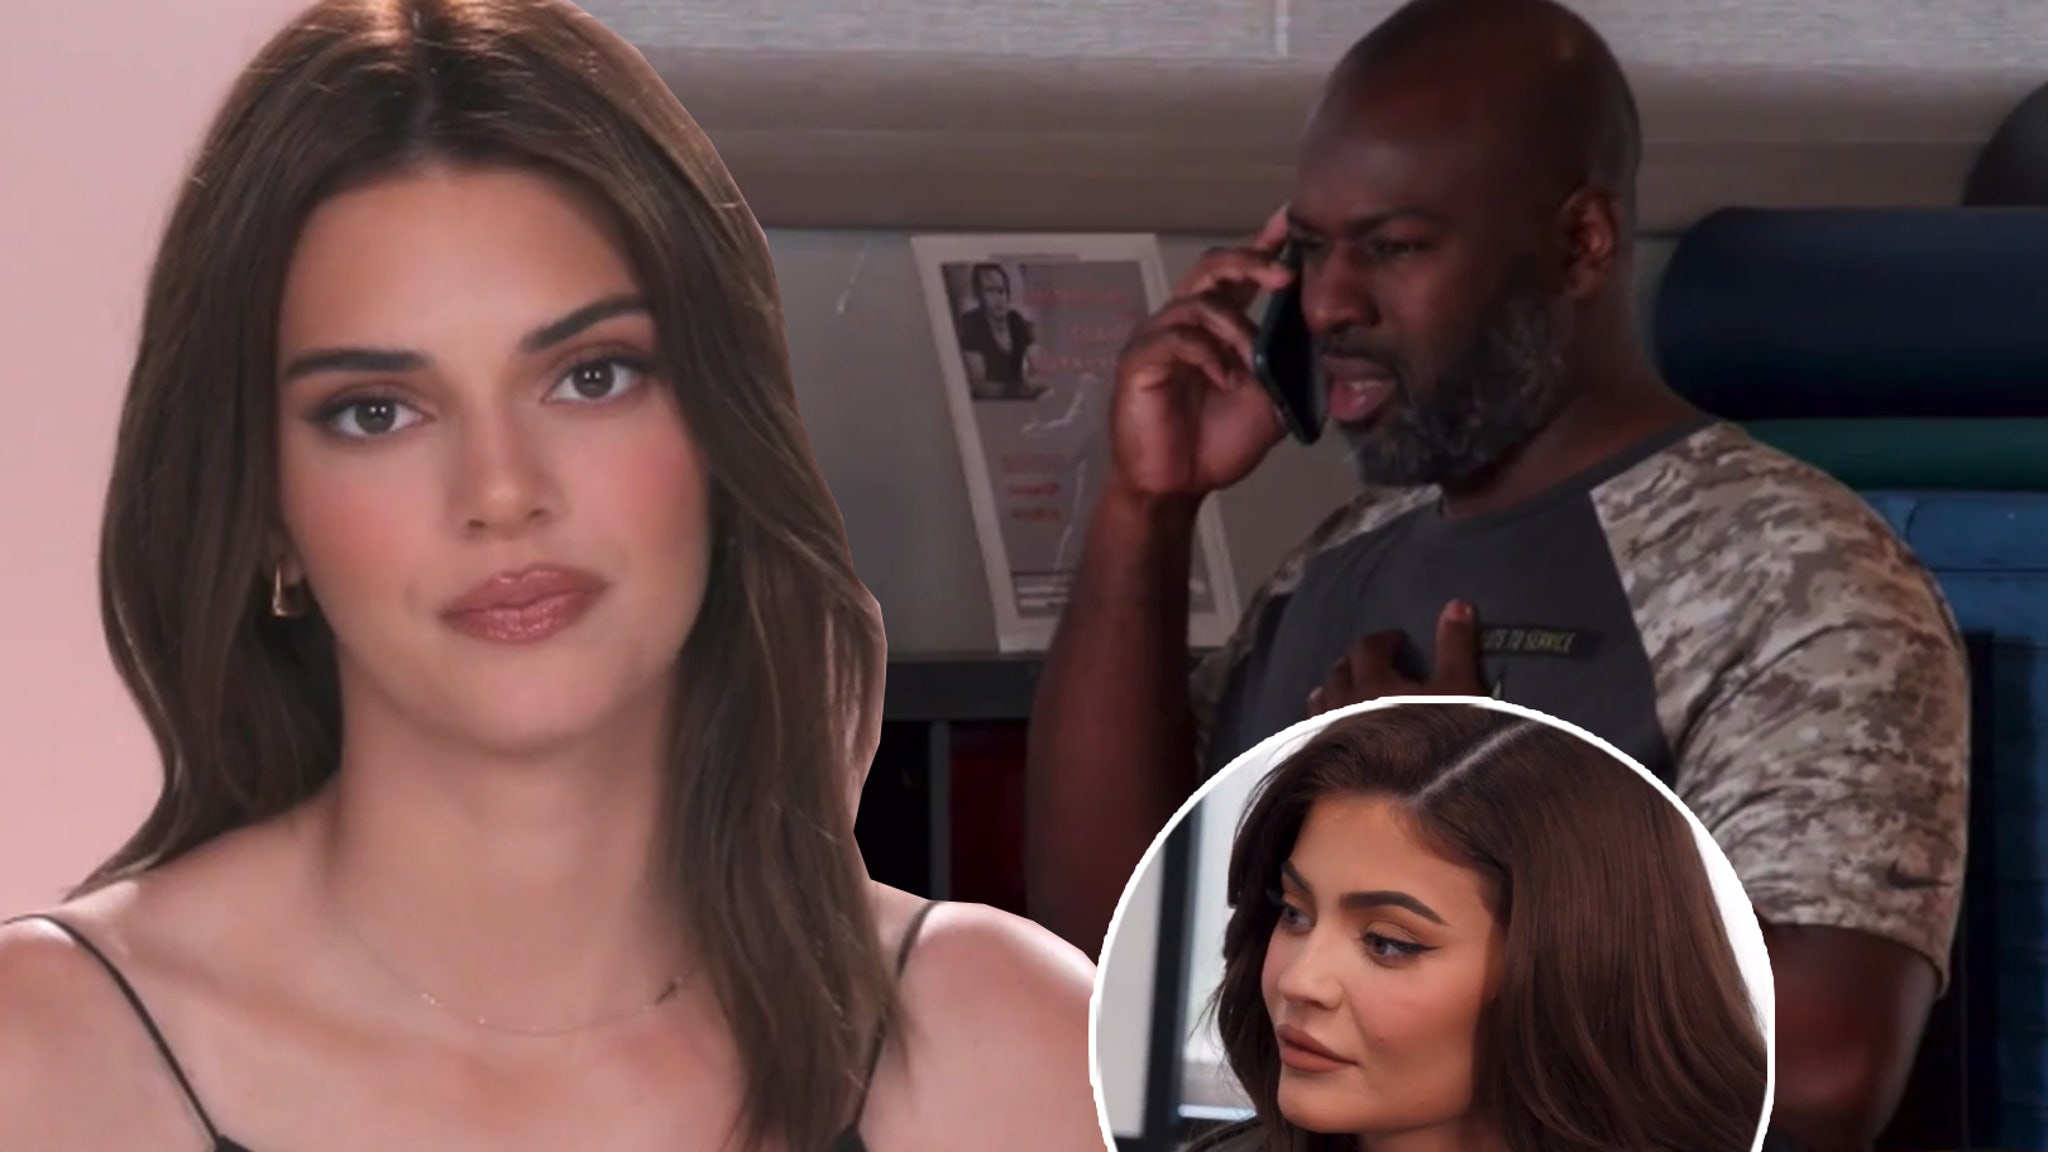 KUWTK Recap: Corey Calls Kendall a Rude 'A-Hole' During Heated Call After Kylie Fight - TooFab